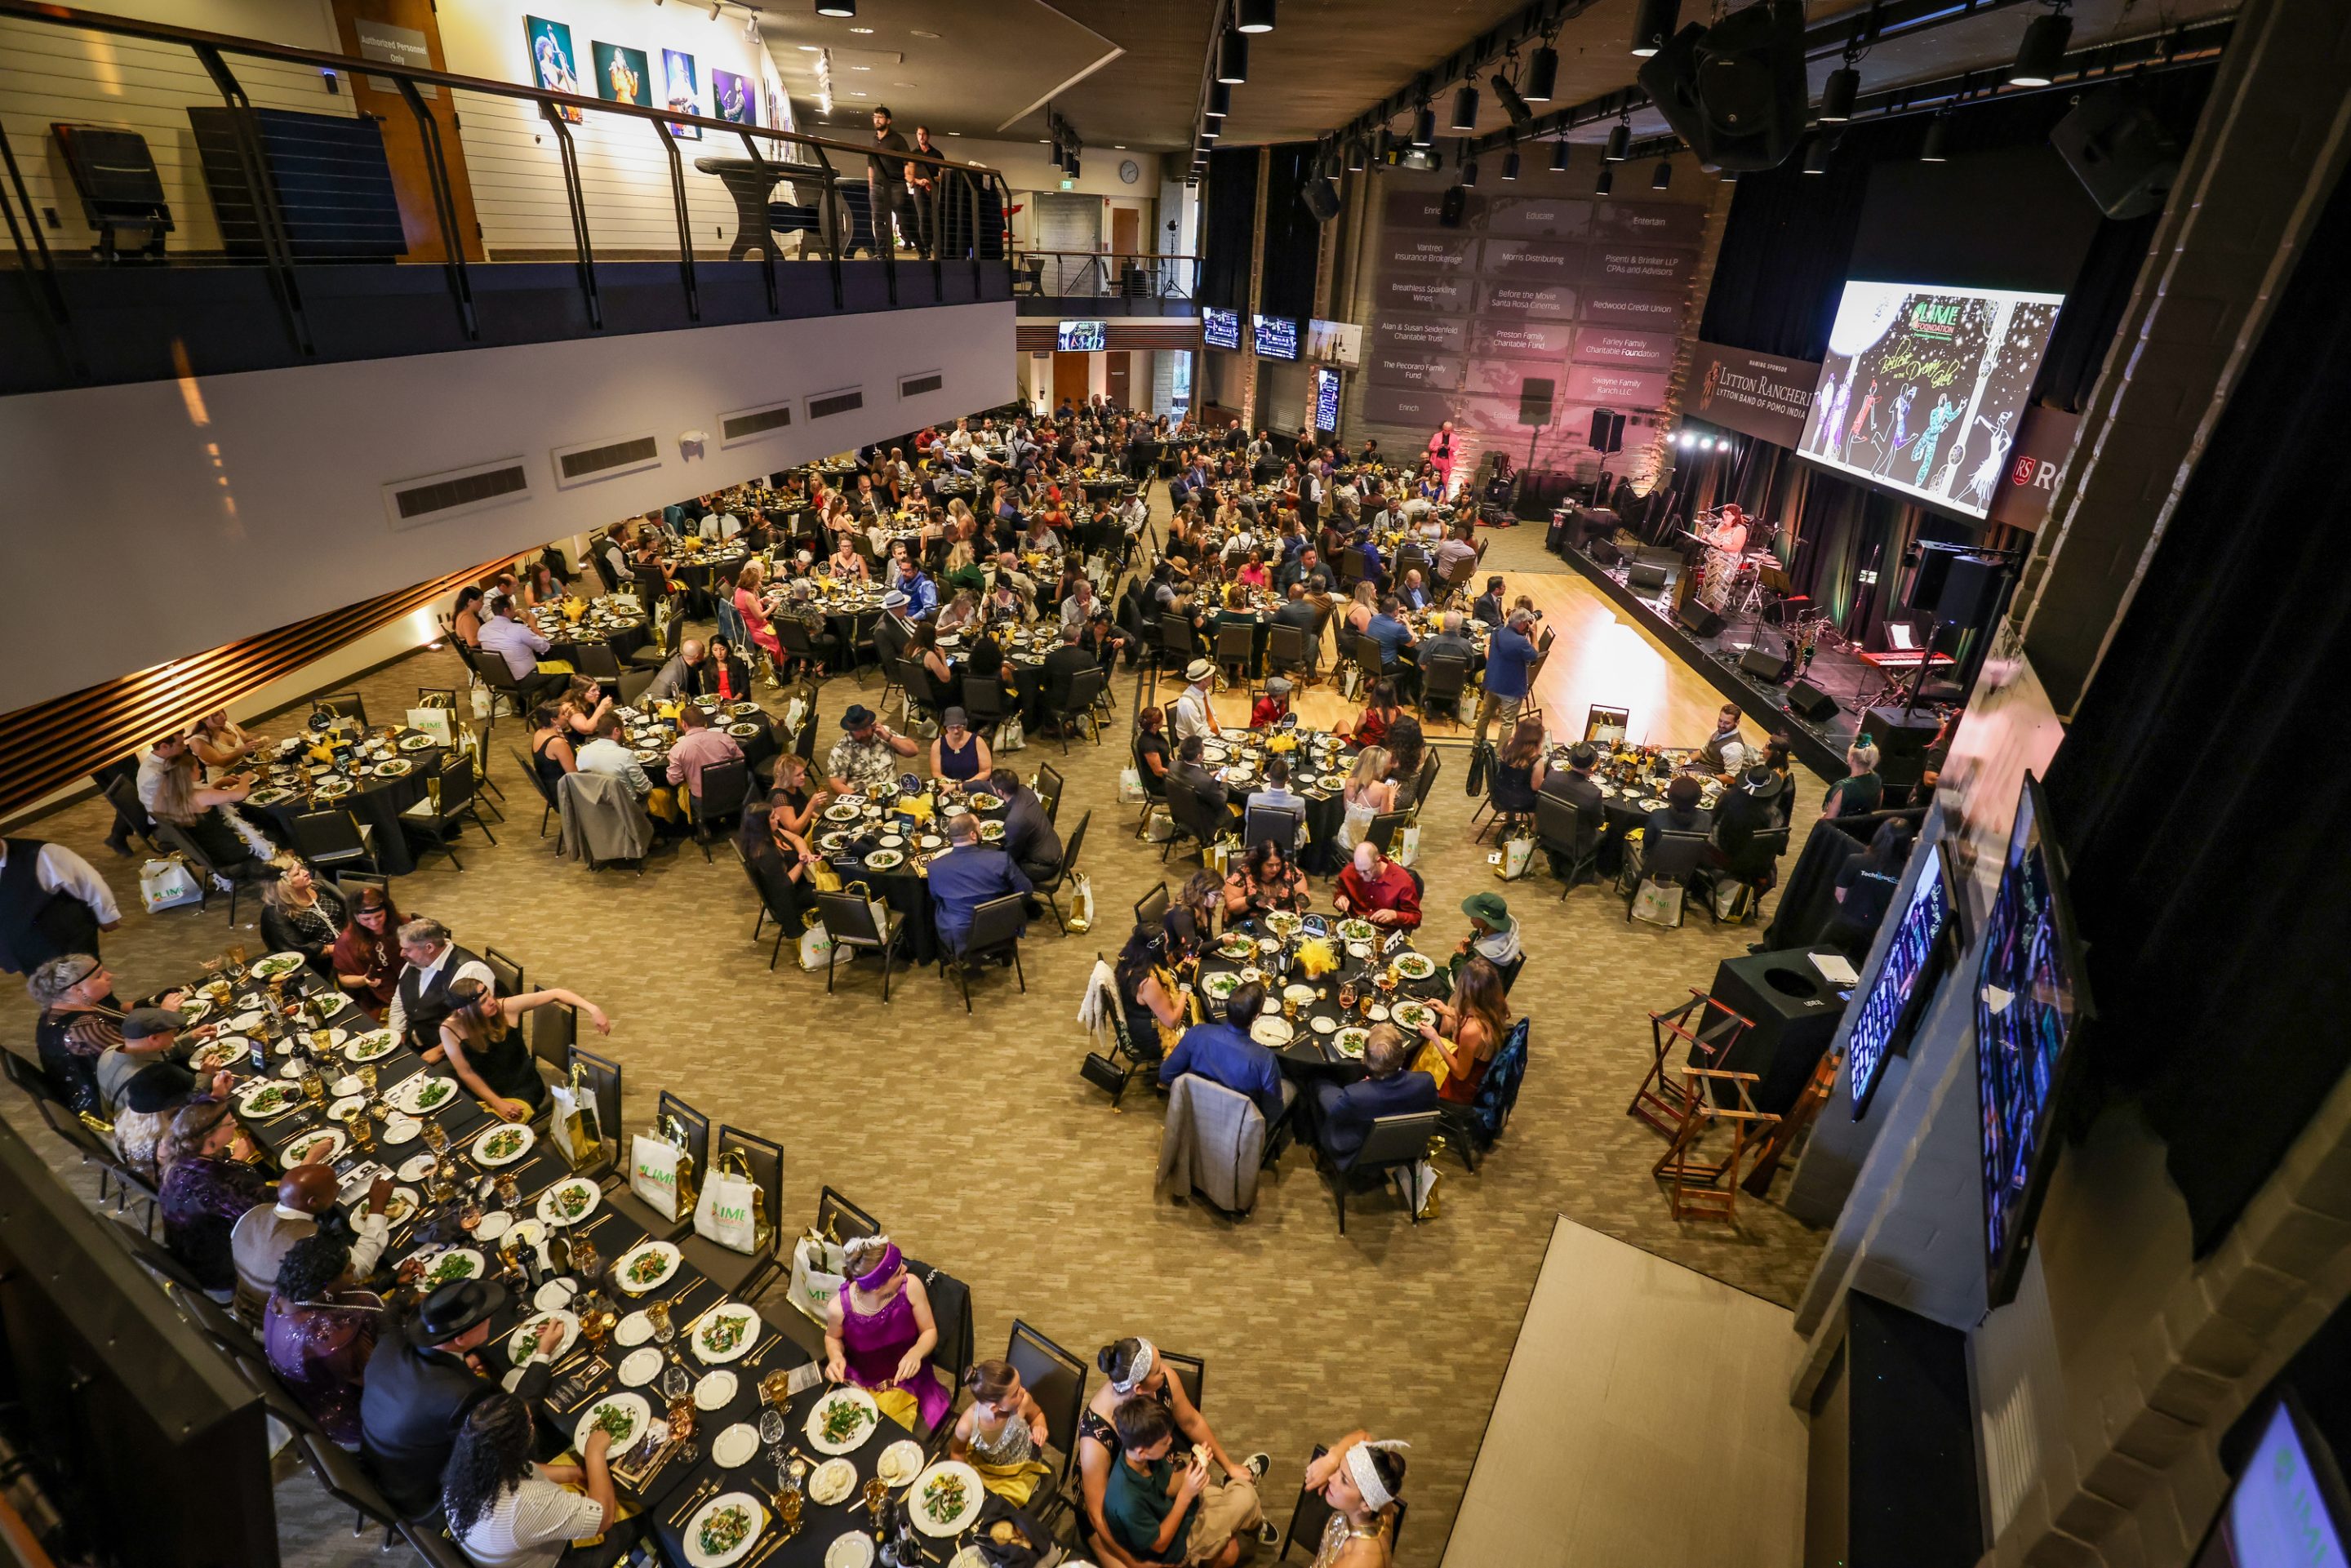 This is an aerial view of a large room at the LIME Foundation event, with people seated at tables.